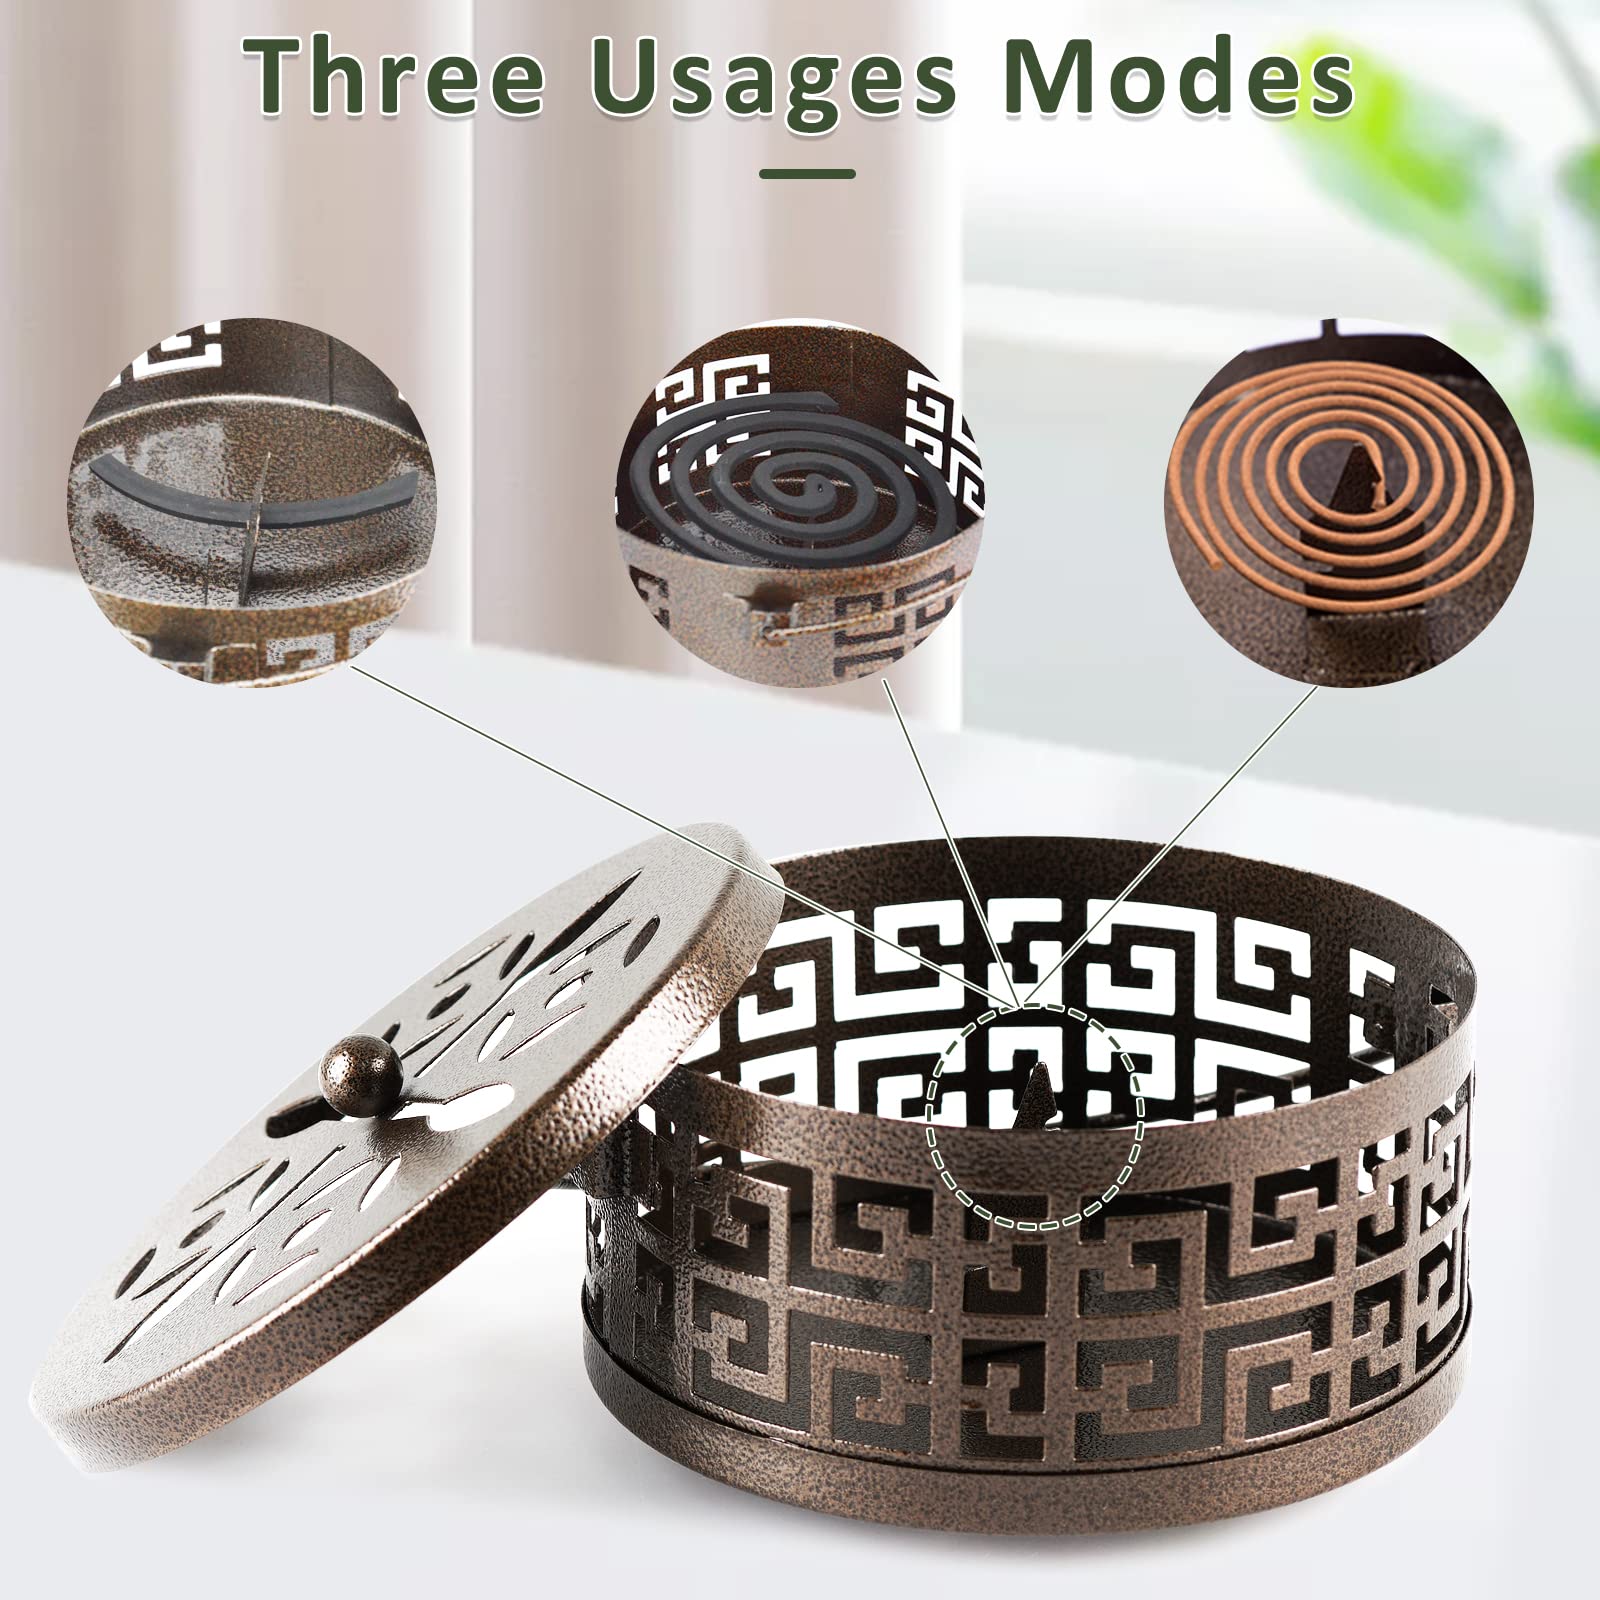 Whiidoom Metal Mosquito Coil Holder with Handle Portable Coil Incense Burner for Home Garden Decorate (Bronze)